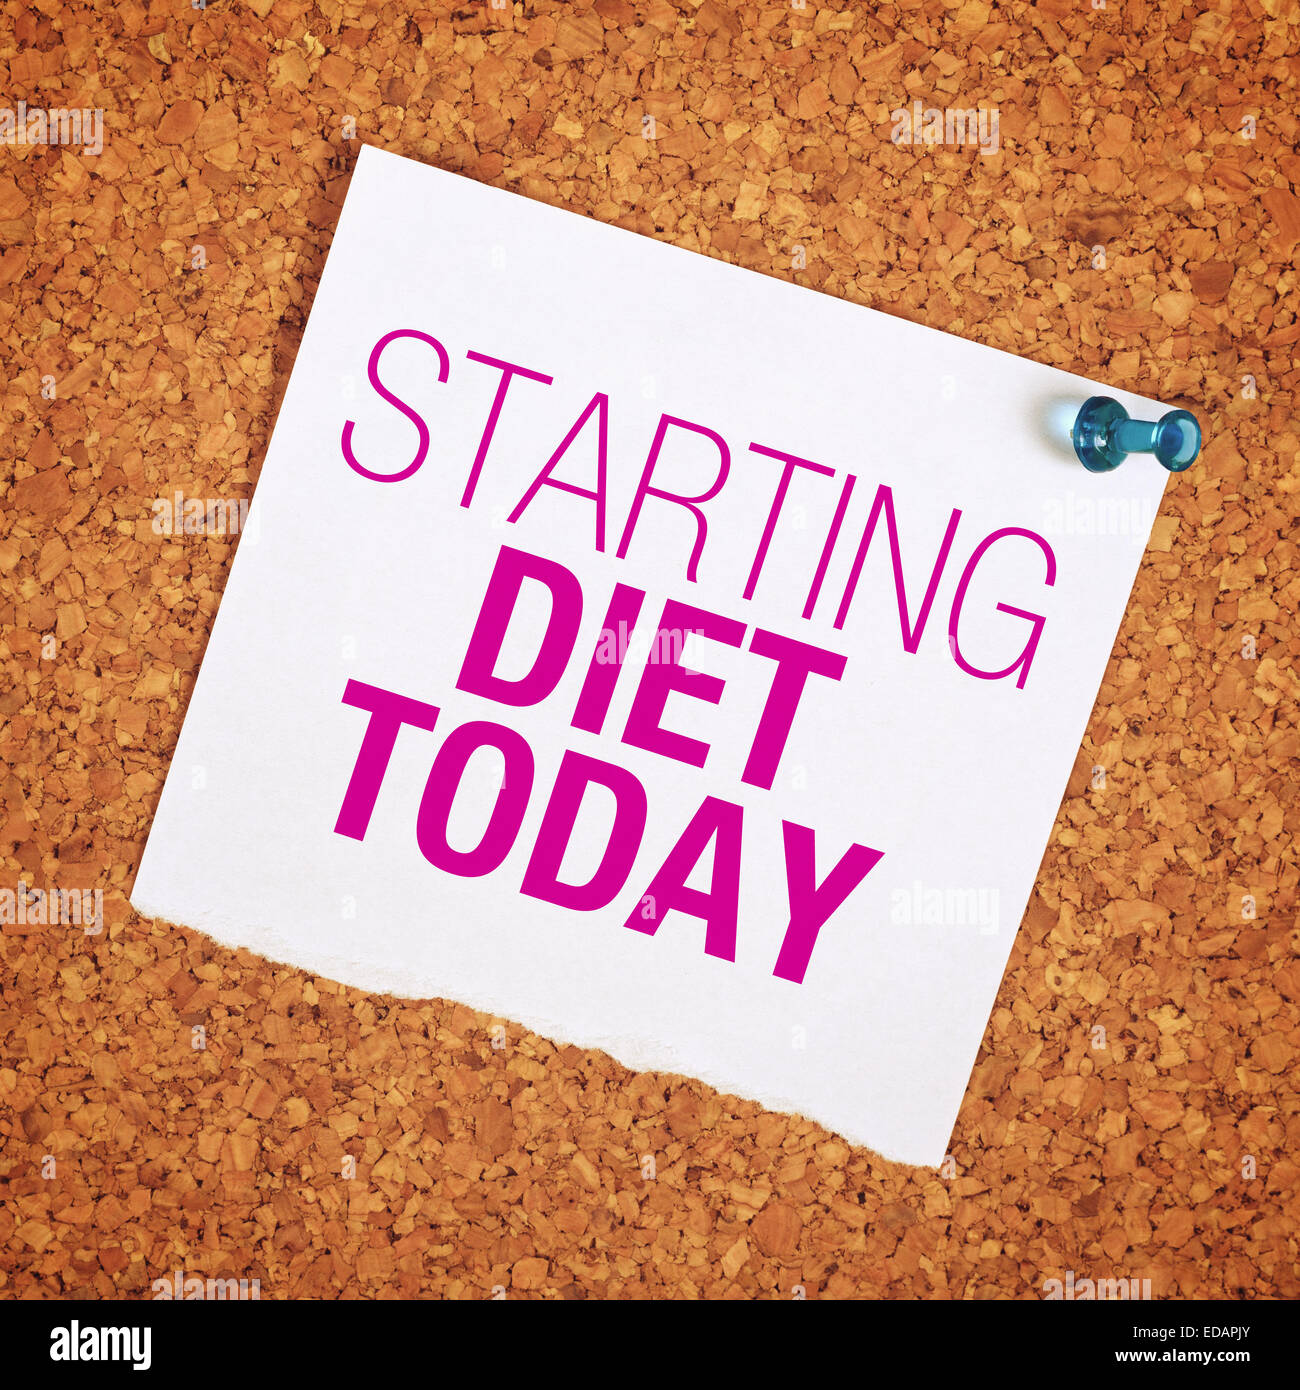 Starting Diet Today Motivational Reminder Note Pinned to a Cork Memory Bulletin Board. Stock Photo